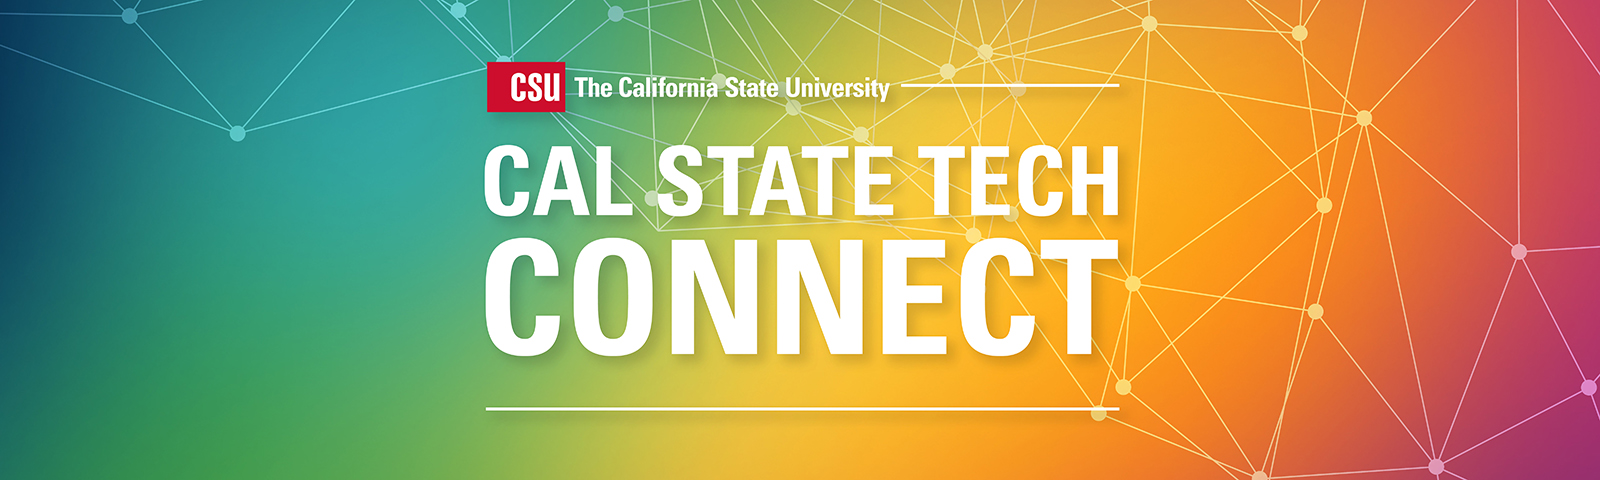 2020 Cal State Tech Connect Virtual Conference